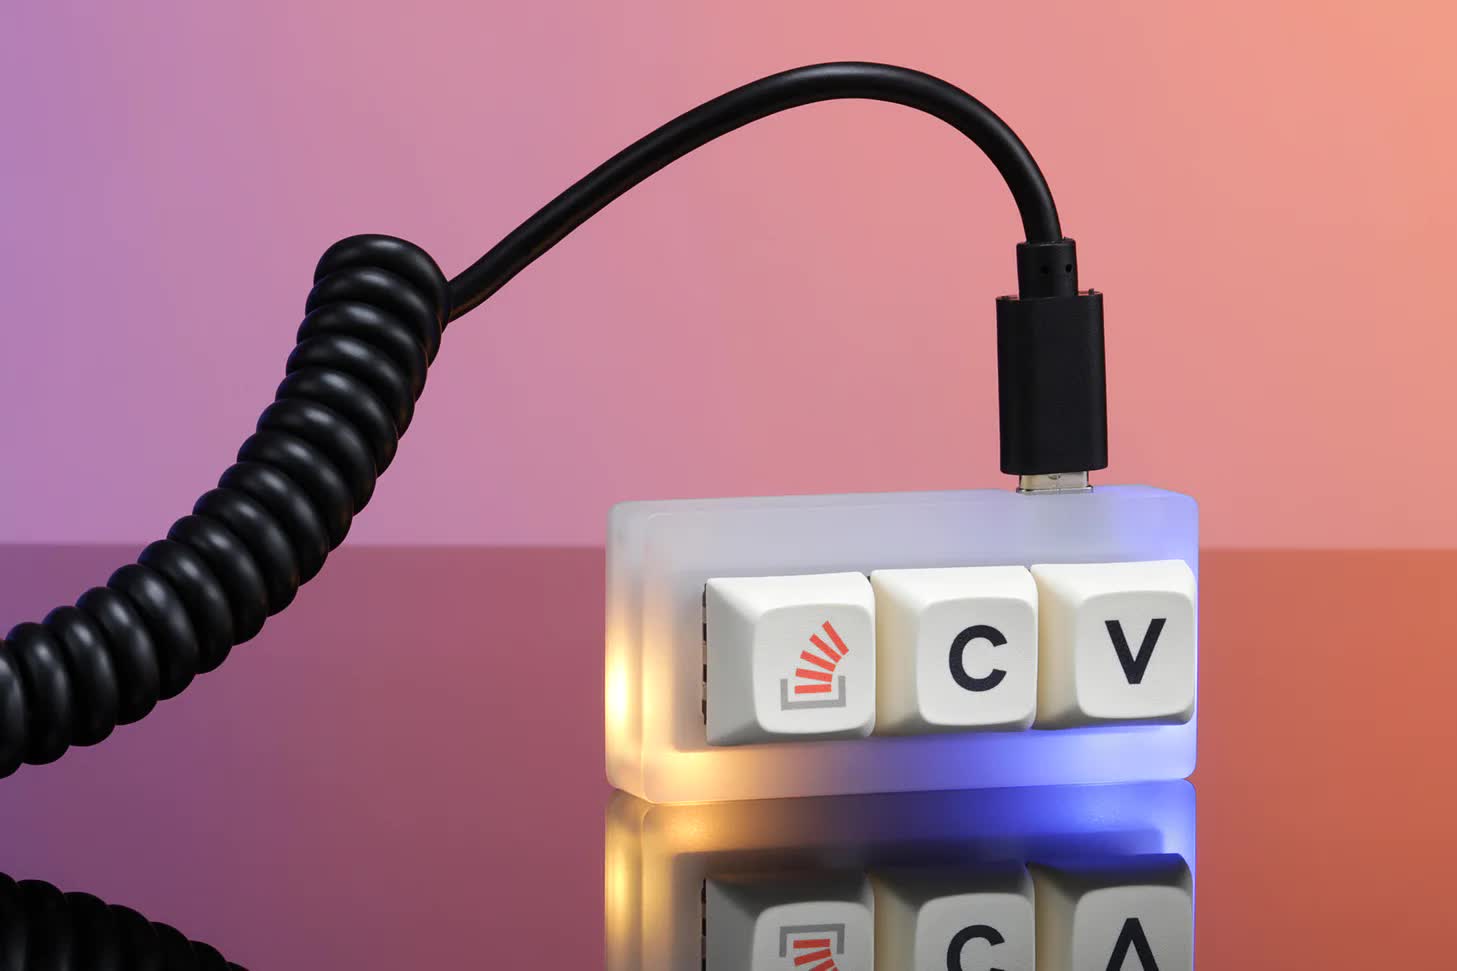 The 3-key Stack Overflow keyboard gets updated with RGB, hot-swappable switches